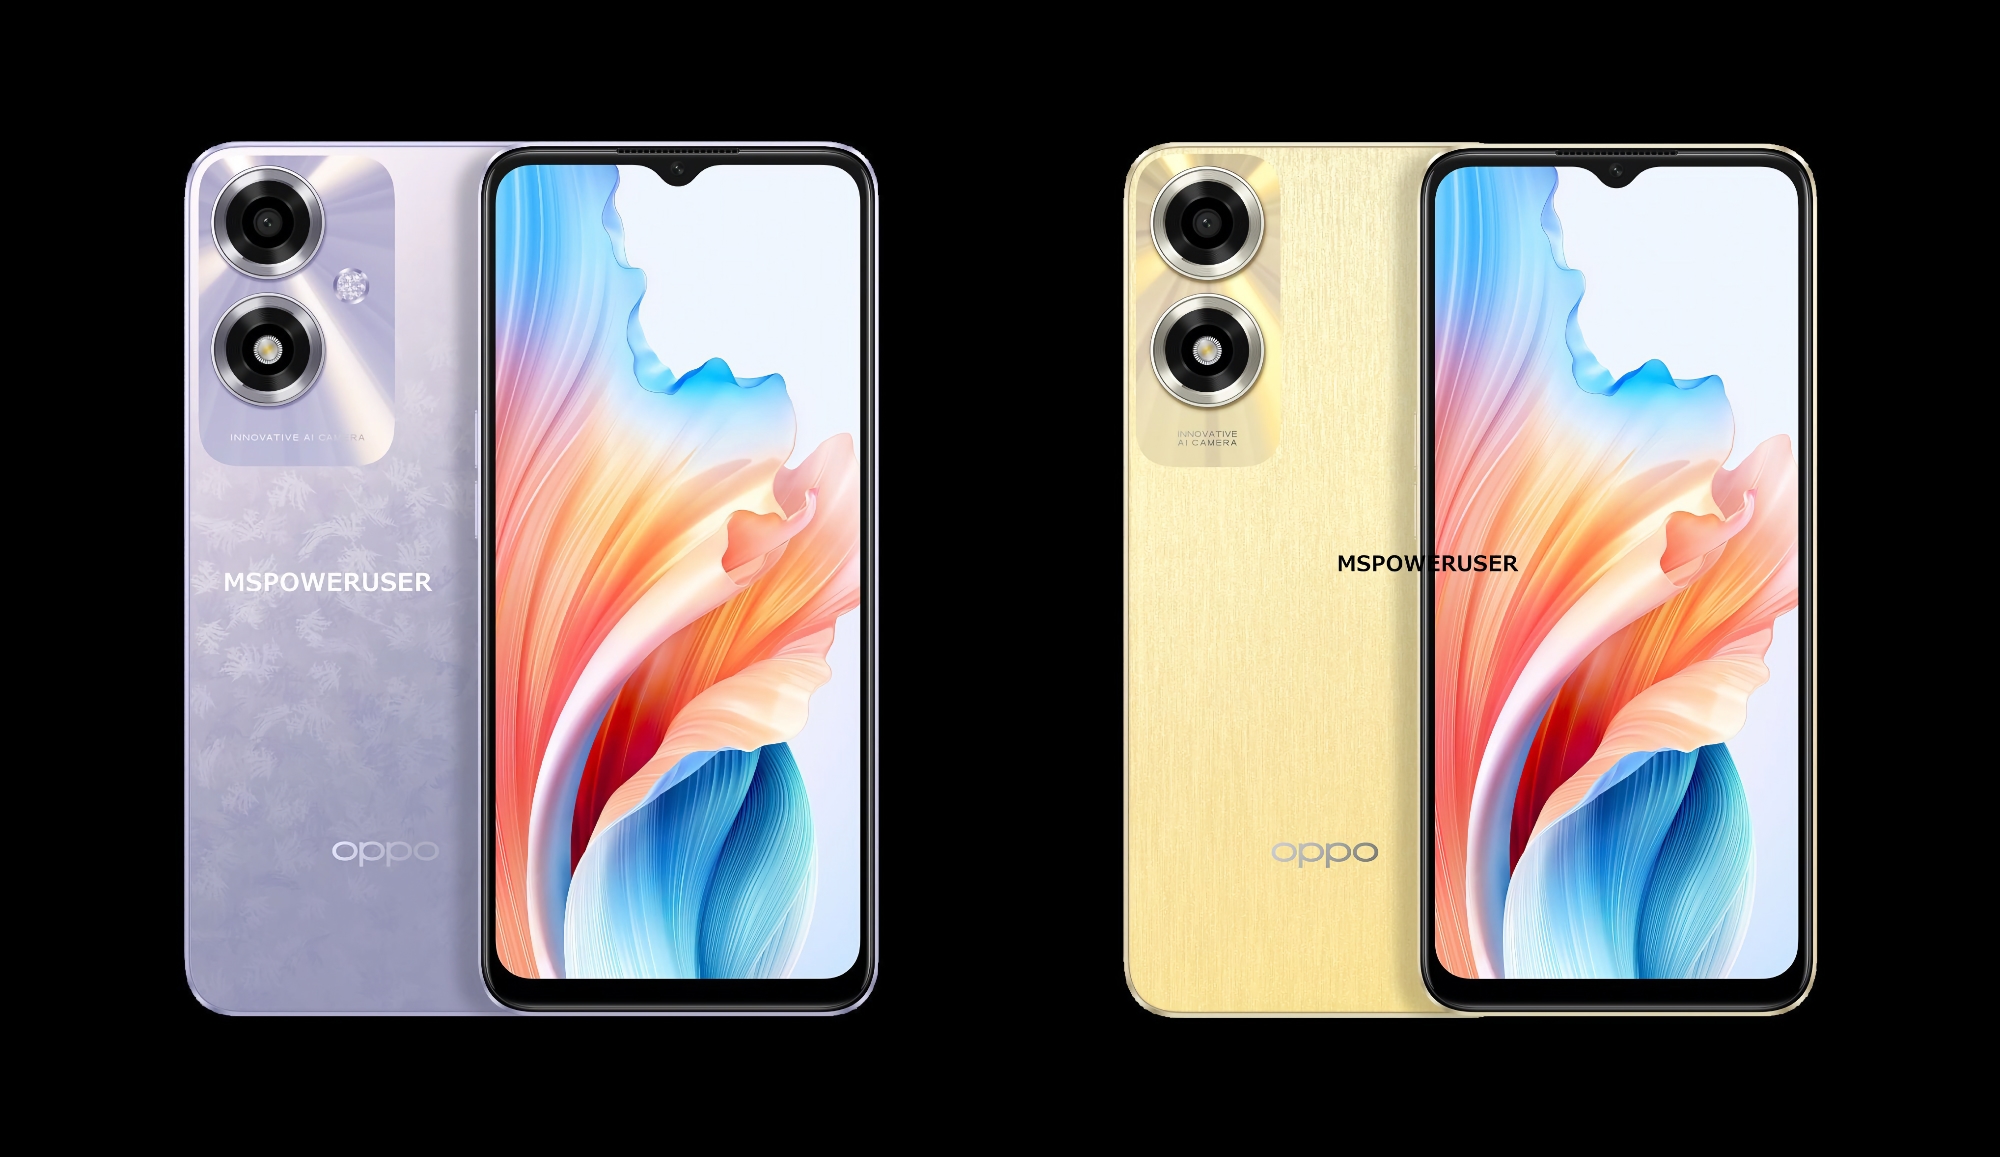 OPPO is preparing to release budget smartphones A2X and A2M: here's what the new products will look like